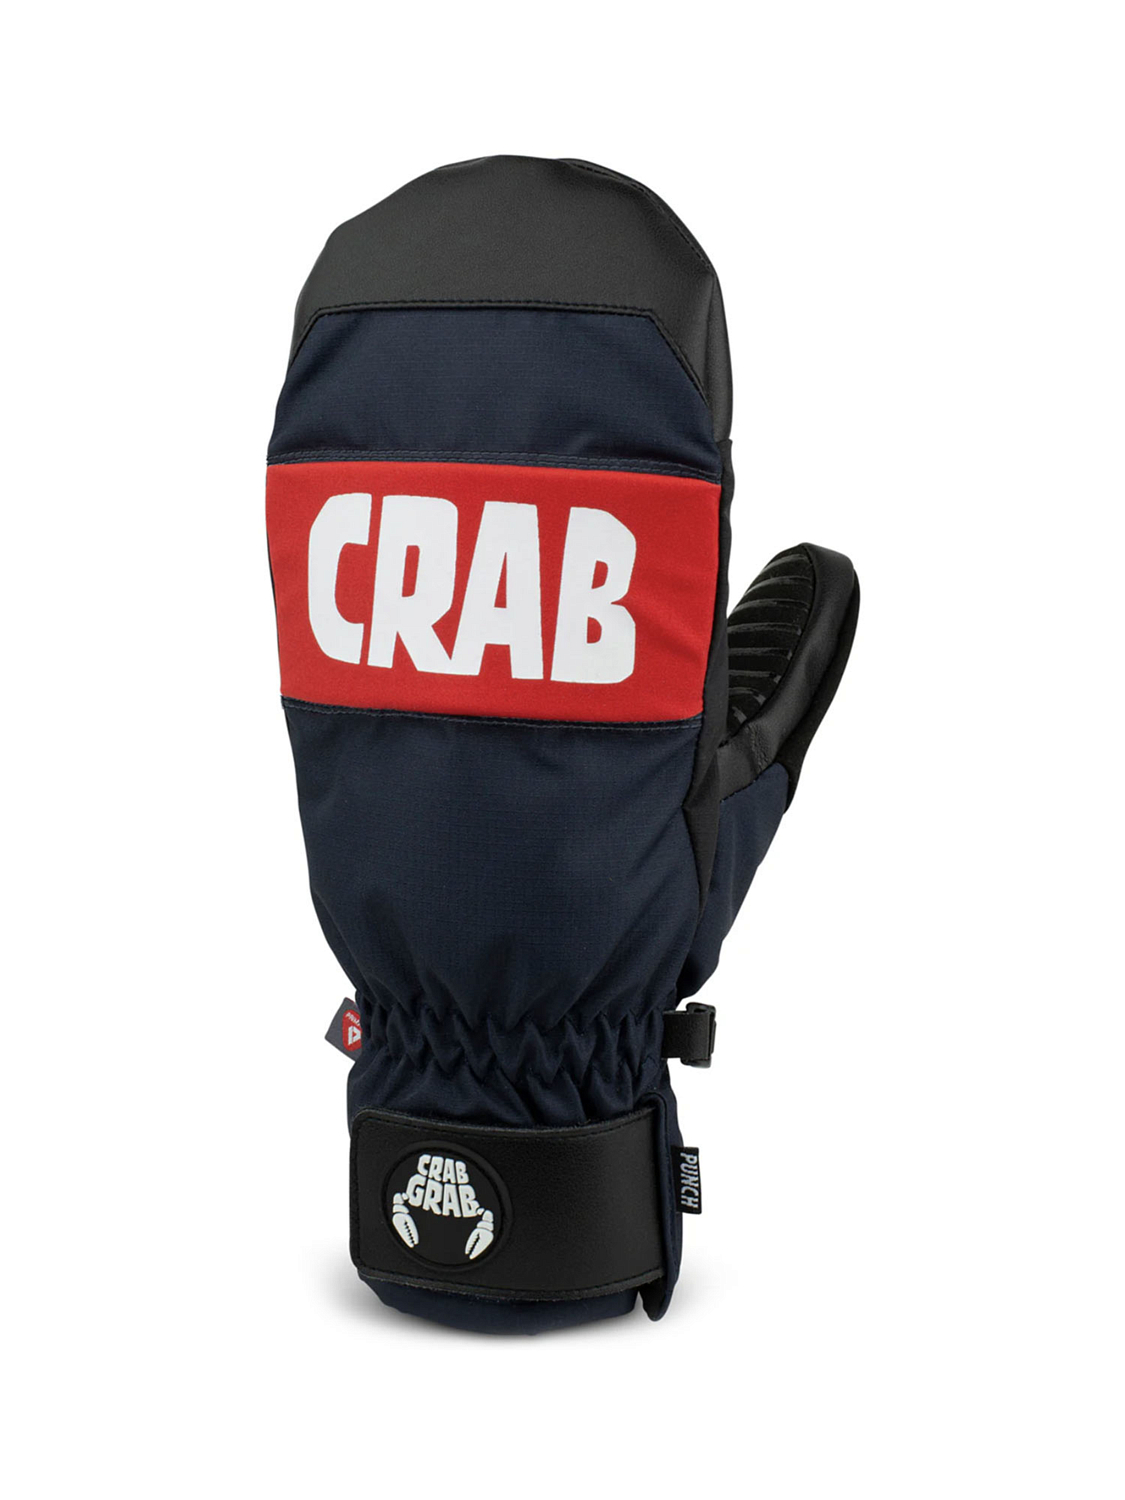 Варежки CRABGRAB Punch Navy and Red